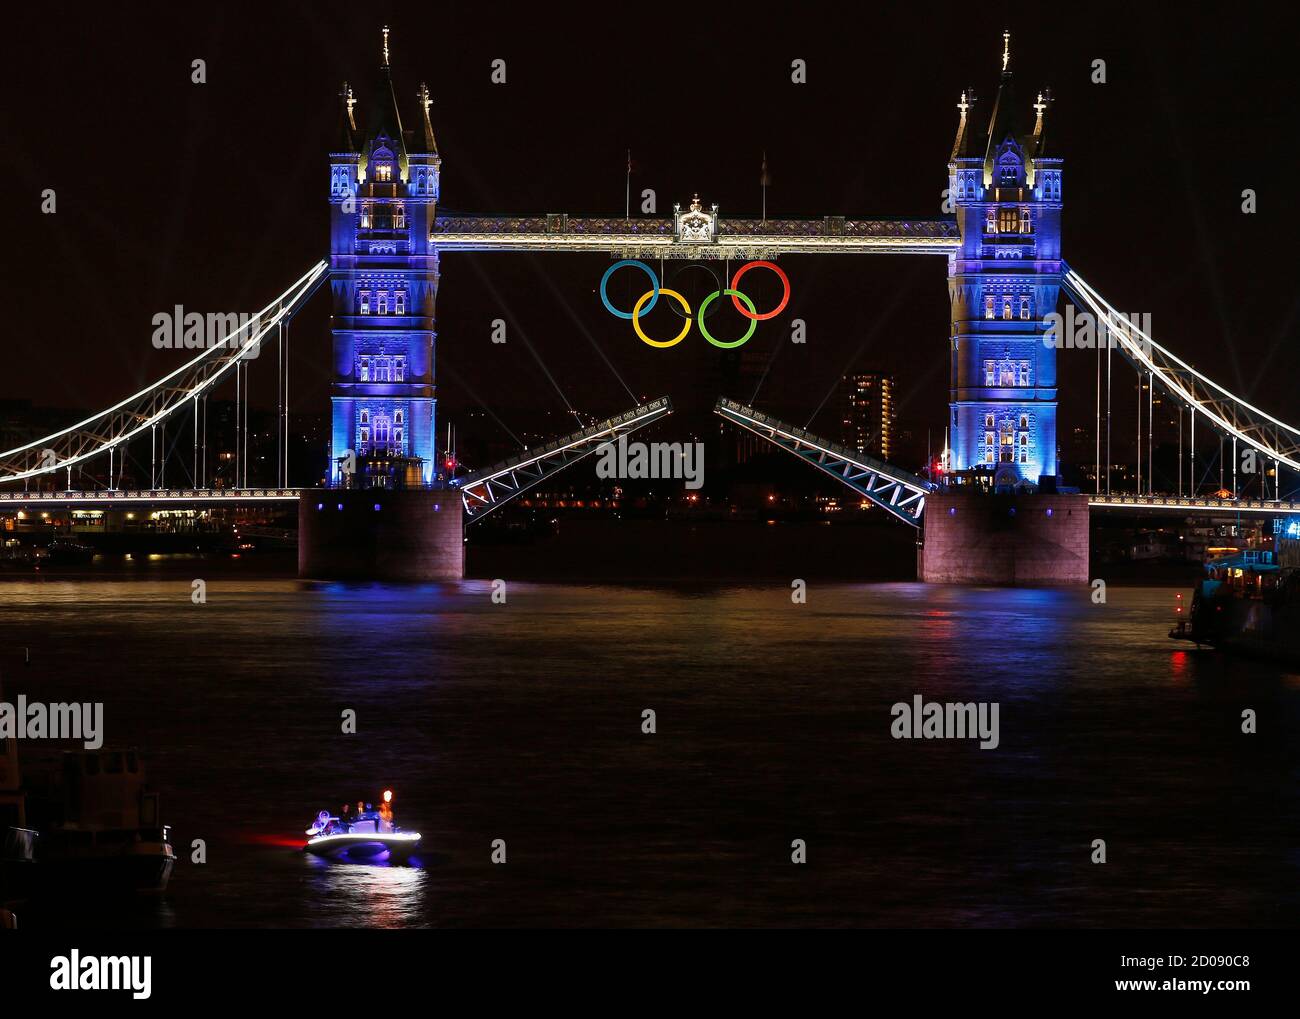 The Olympic rings hang on London's Tower Bridge as a speedboat driven by Britain's David Beckham and carrying the Olympic torch prepares to drive under the bridge to mark the opening ceremony of the London 2012 Olympic Games July 27, 2012. REUTERS/Paul Hanna  (BRITAIN - Tags: SPORT OLYMPICS CITYSPACE) FOR BEST QUALITY IMAGE SEE: GM2E88E1KOG01 Stock Photo